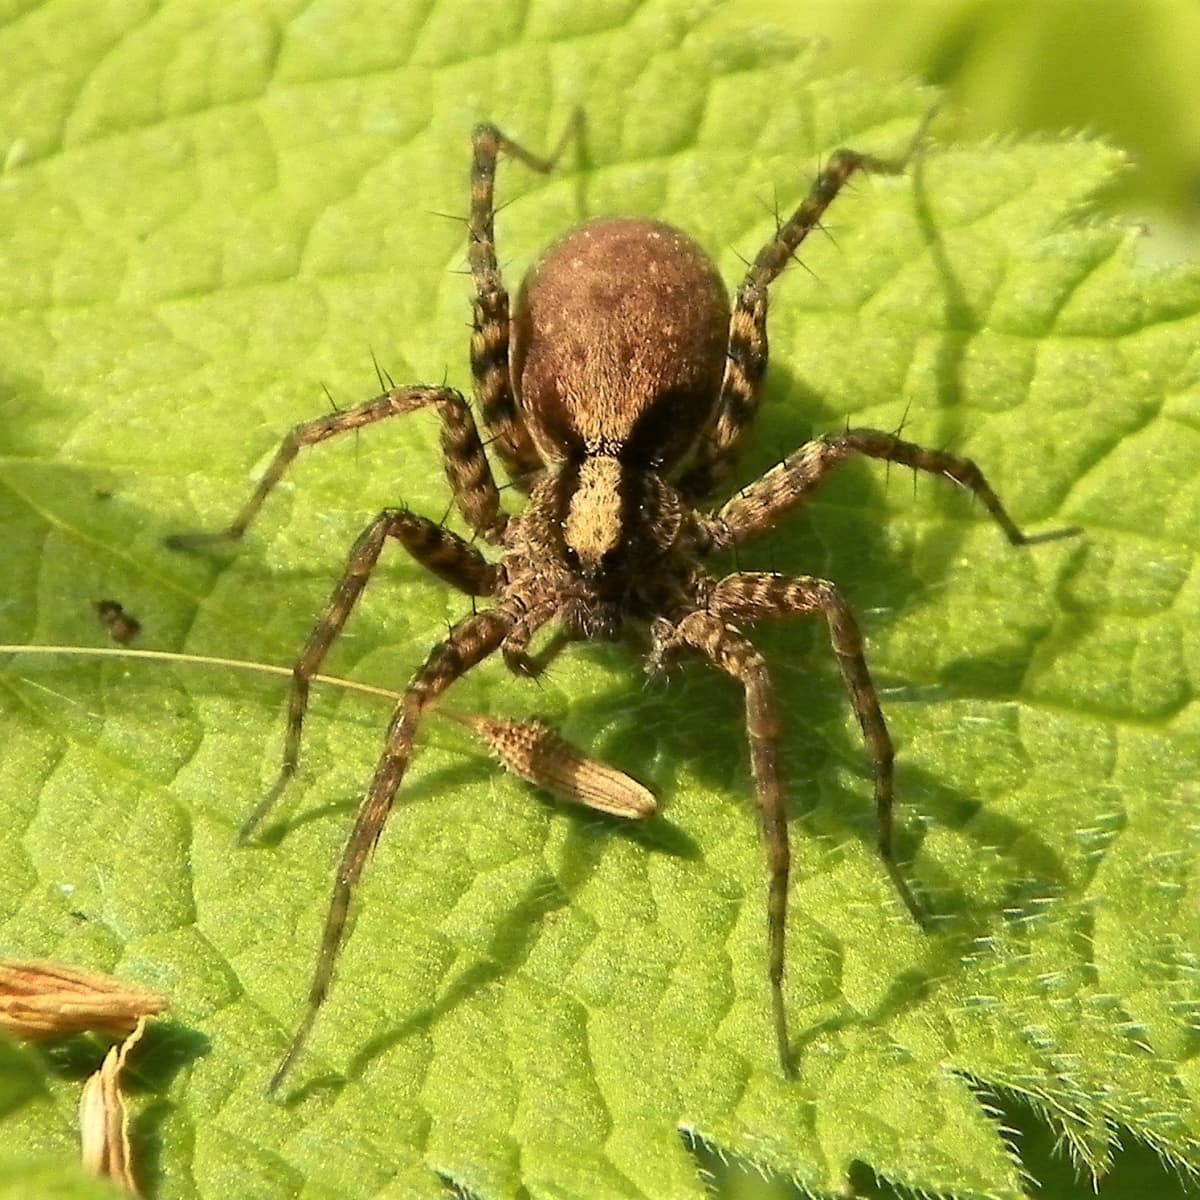 wolf spider pictures and facts